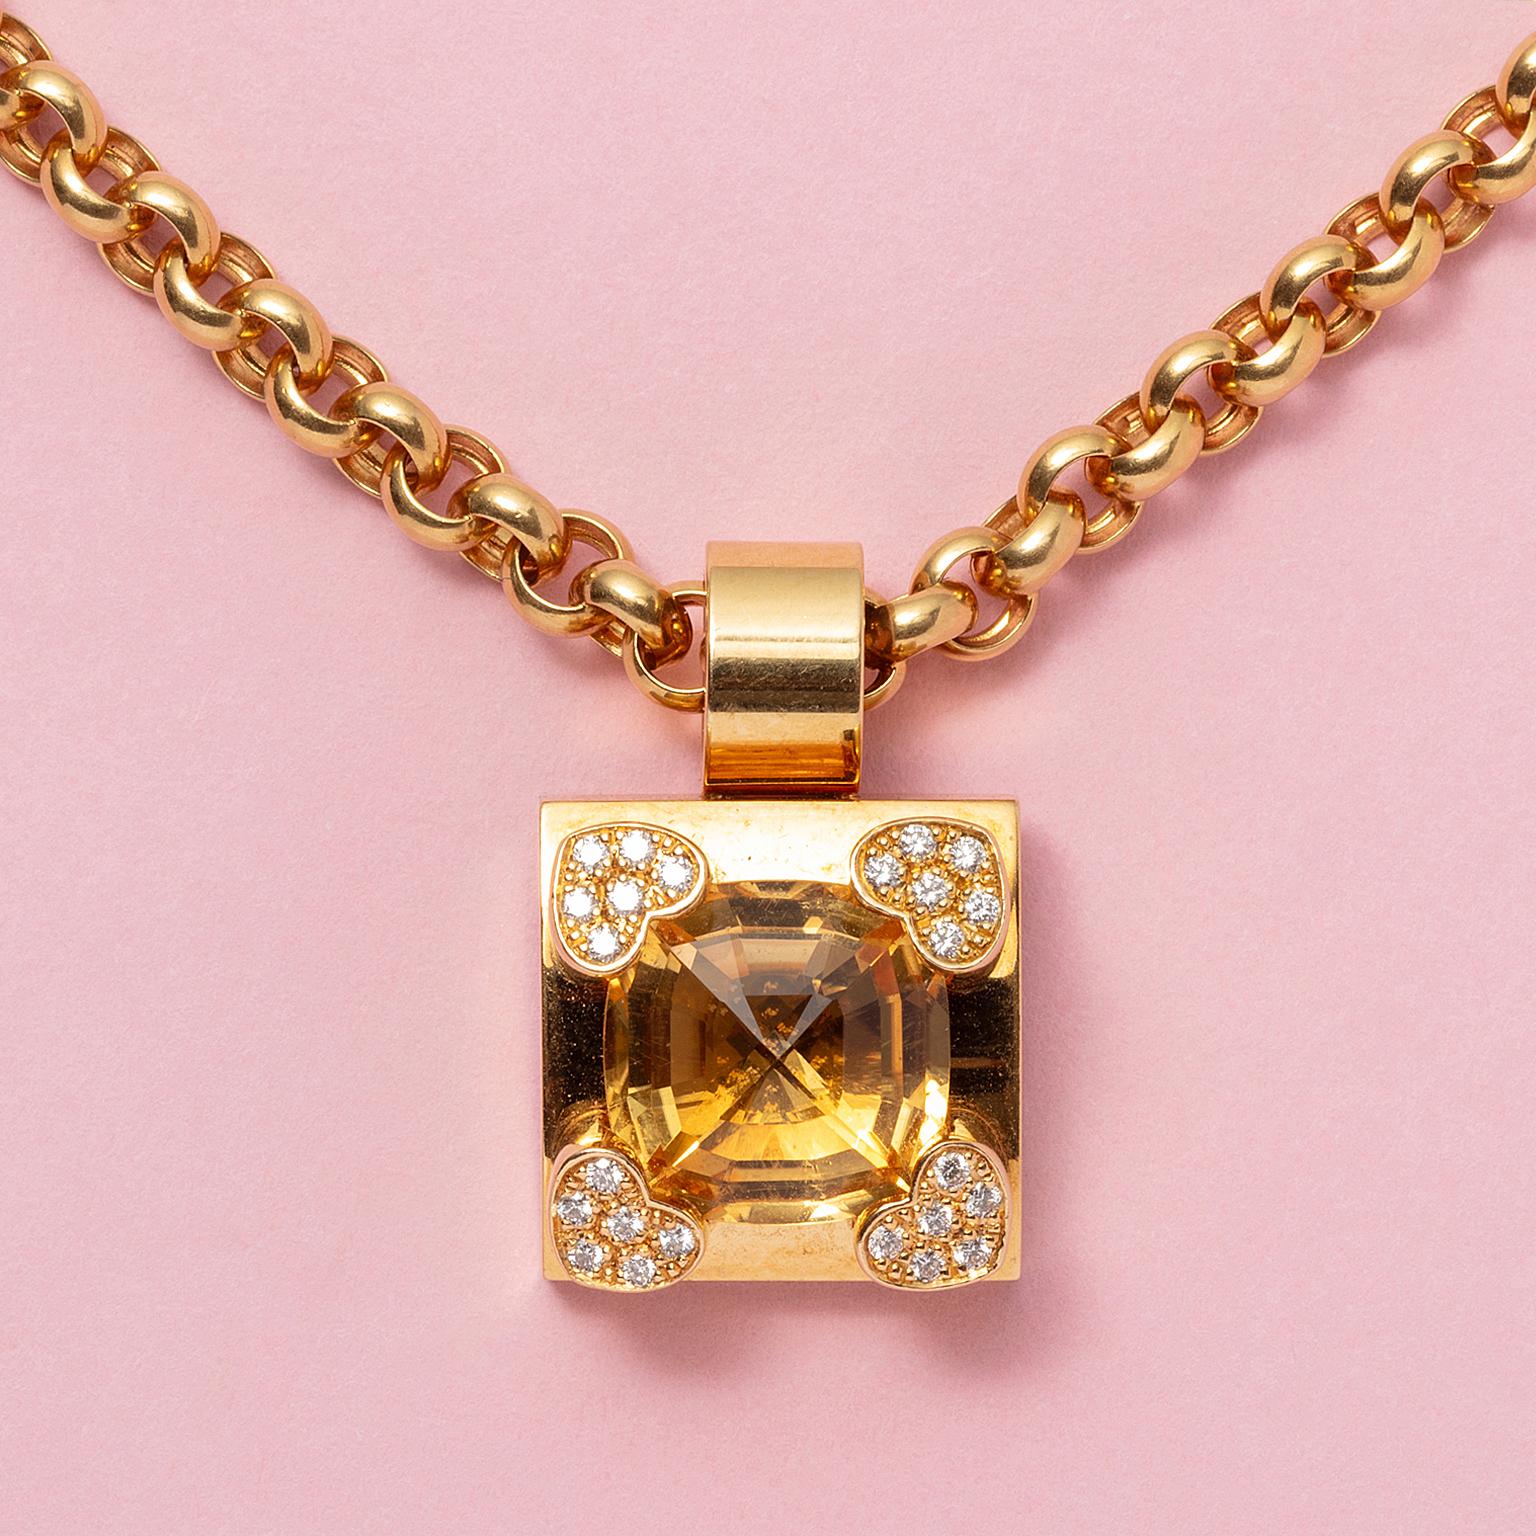 A 18 carat yellow gold square pendant set with a big cushion cut citrine held by four hearts in the corners each pavé set with diamonds. With a 18 carat yellow gold necklace. Both signed: Chopard, 2746331, 79/3832/20, French.

weight pendant: 11.12